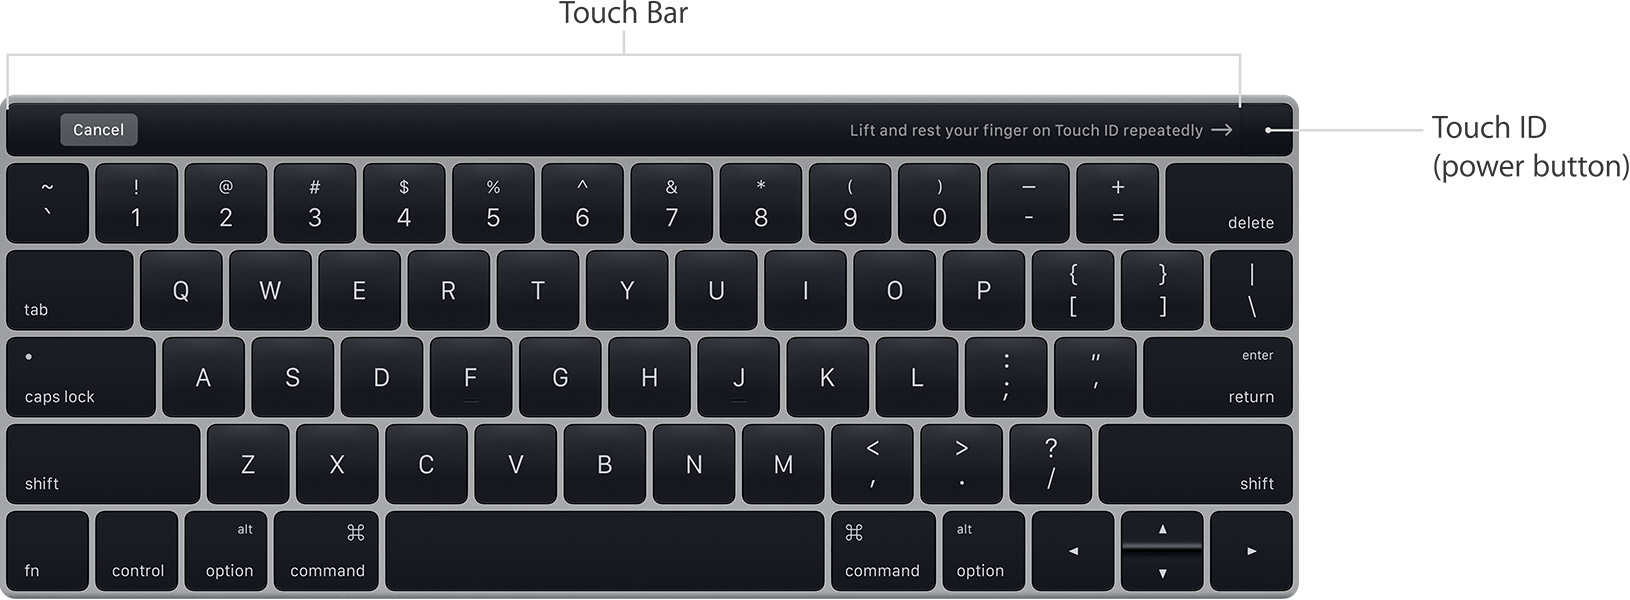 macbook-pro-touch-id-touch-bar-keyboard